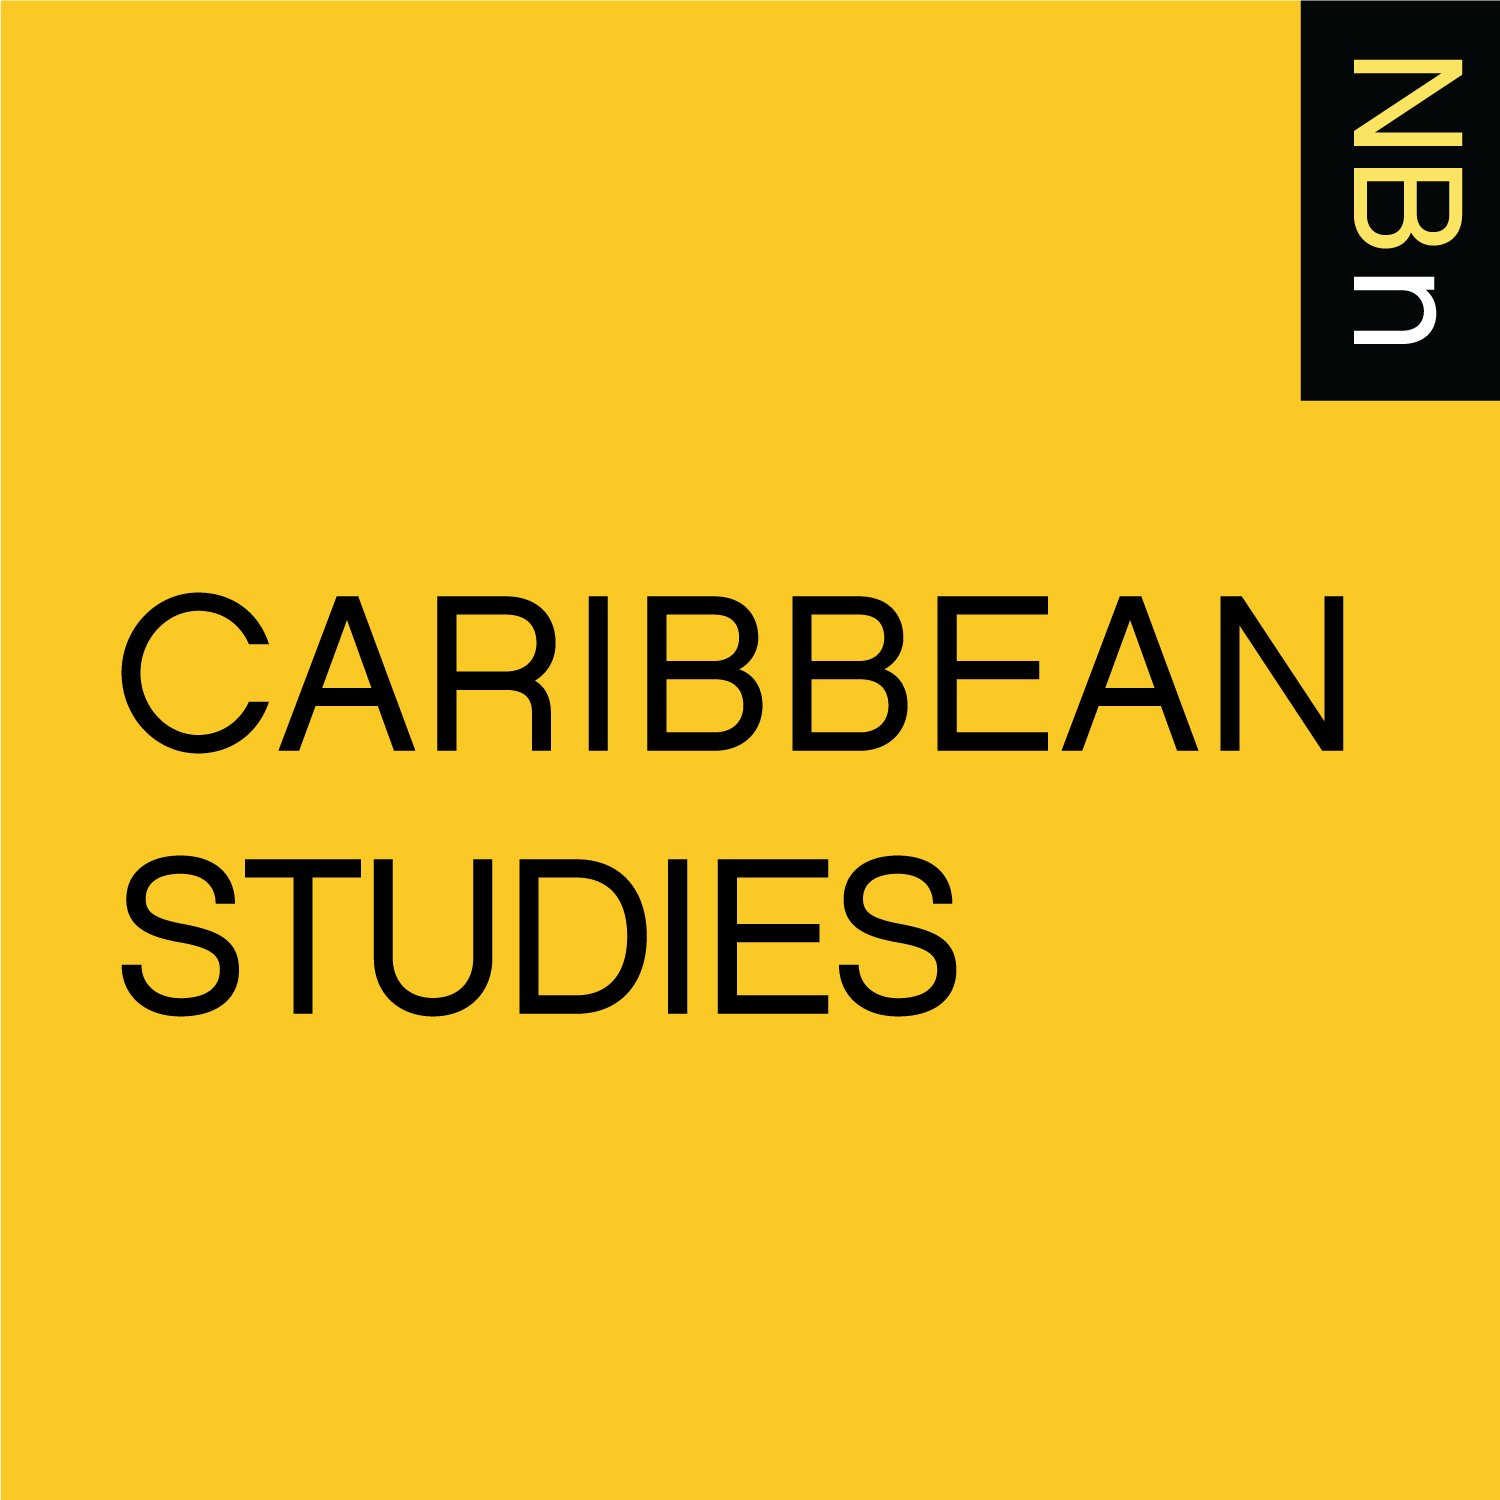 New Books in #CaribbeanStudies an author-interview #podcast  channel in the @NewBooksNetwork. Listen on Apple Podcasts: https://t.co/7HHvYaw0zo